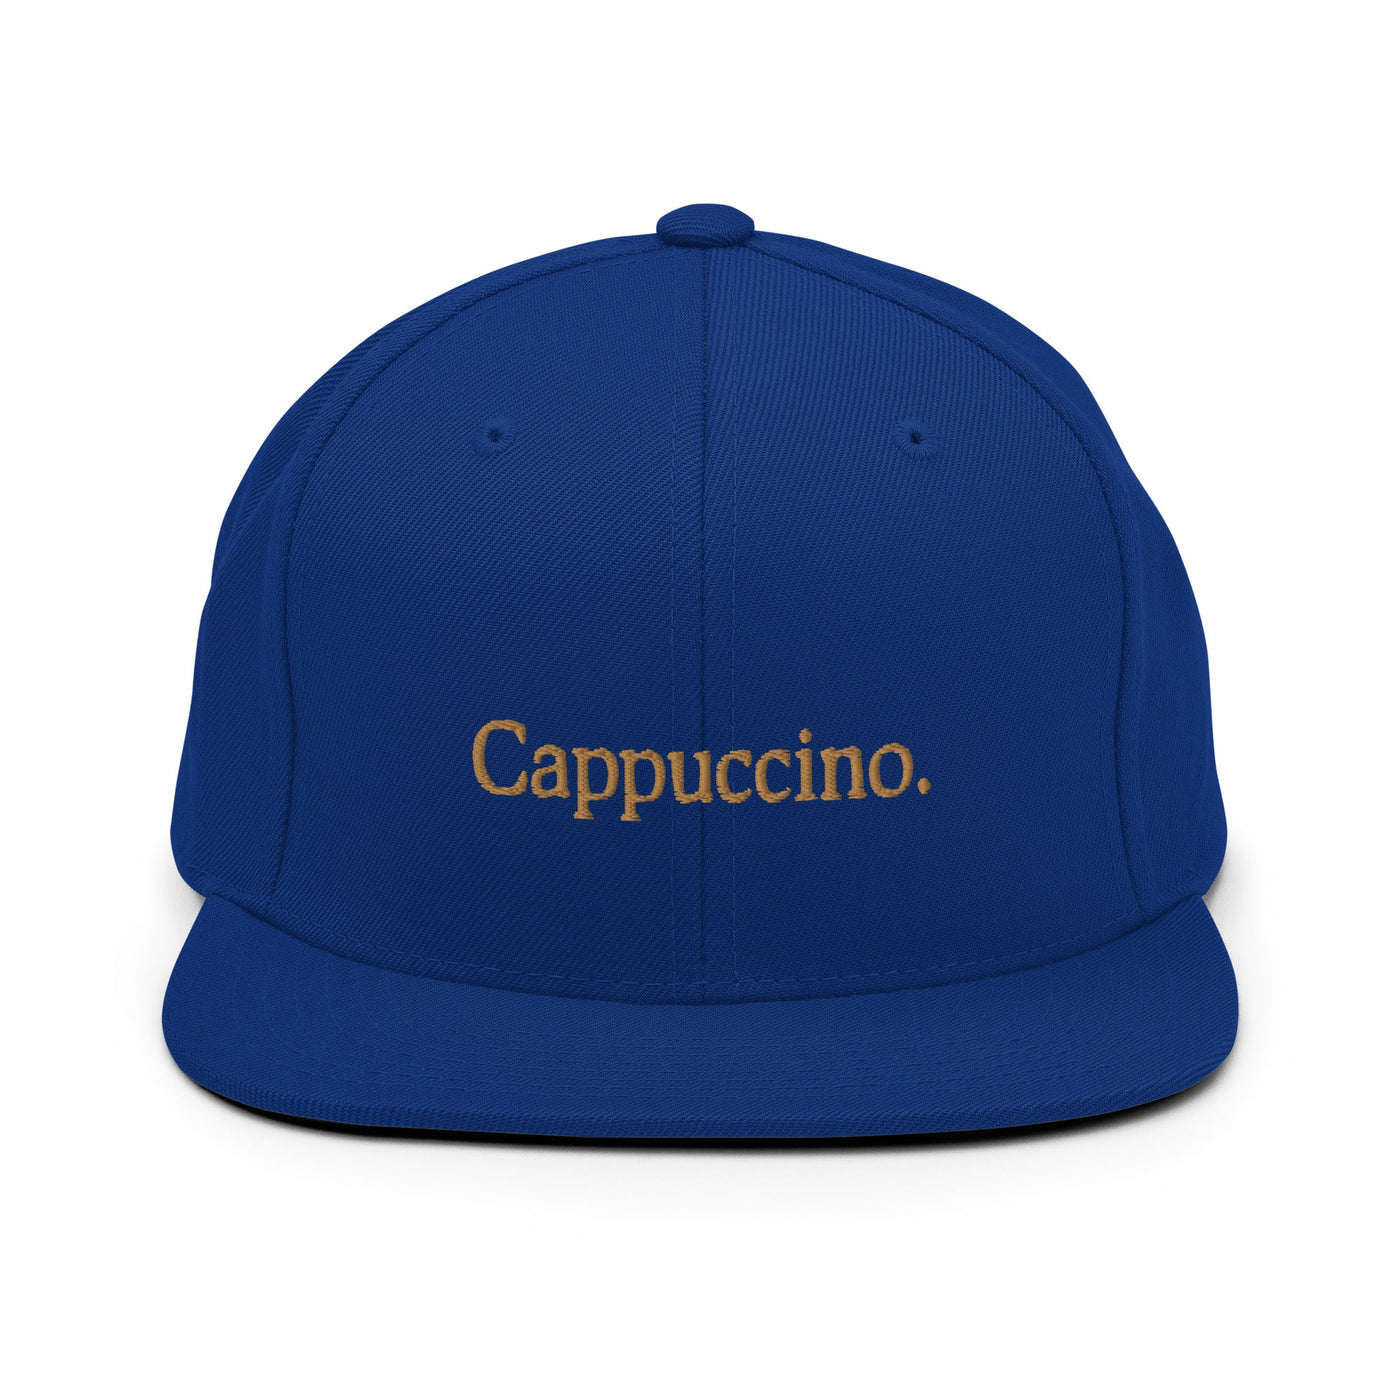 Cappuccino. Snapback Hat - Royal Blue - - Just Another Cap Store